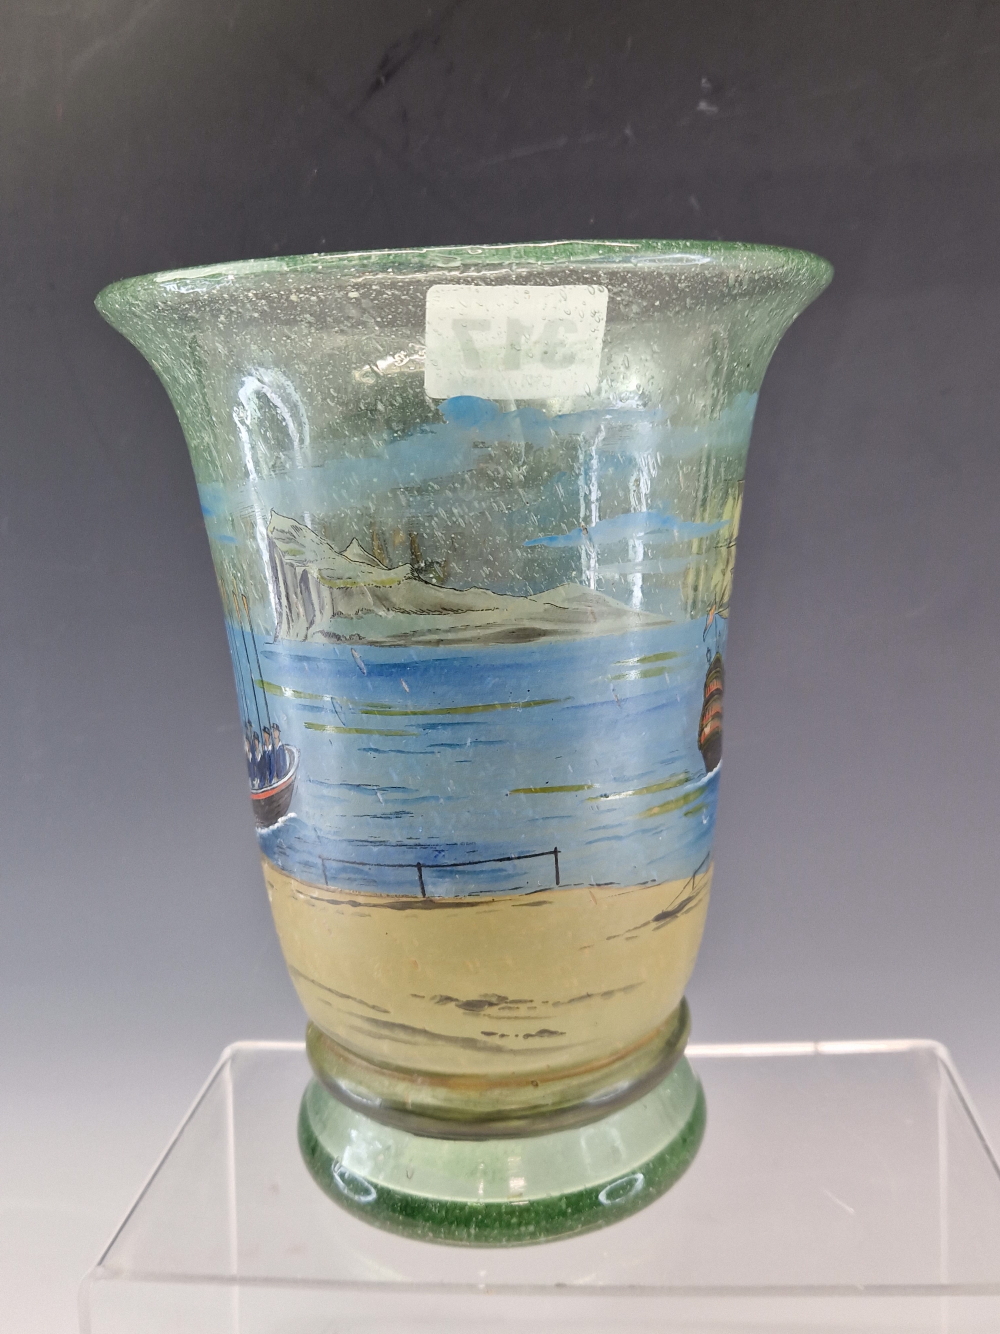 AN EARLY 20th C. GLASS VASE PAINTED WITH 18th C. NAVAL OFFICERS ABOUT TO BE ROWED OUT TO GUN SHIPS - Image 3 of 5